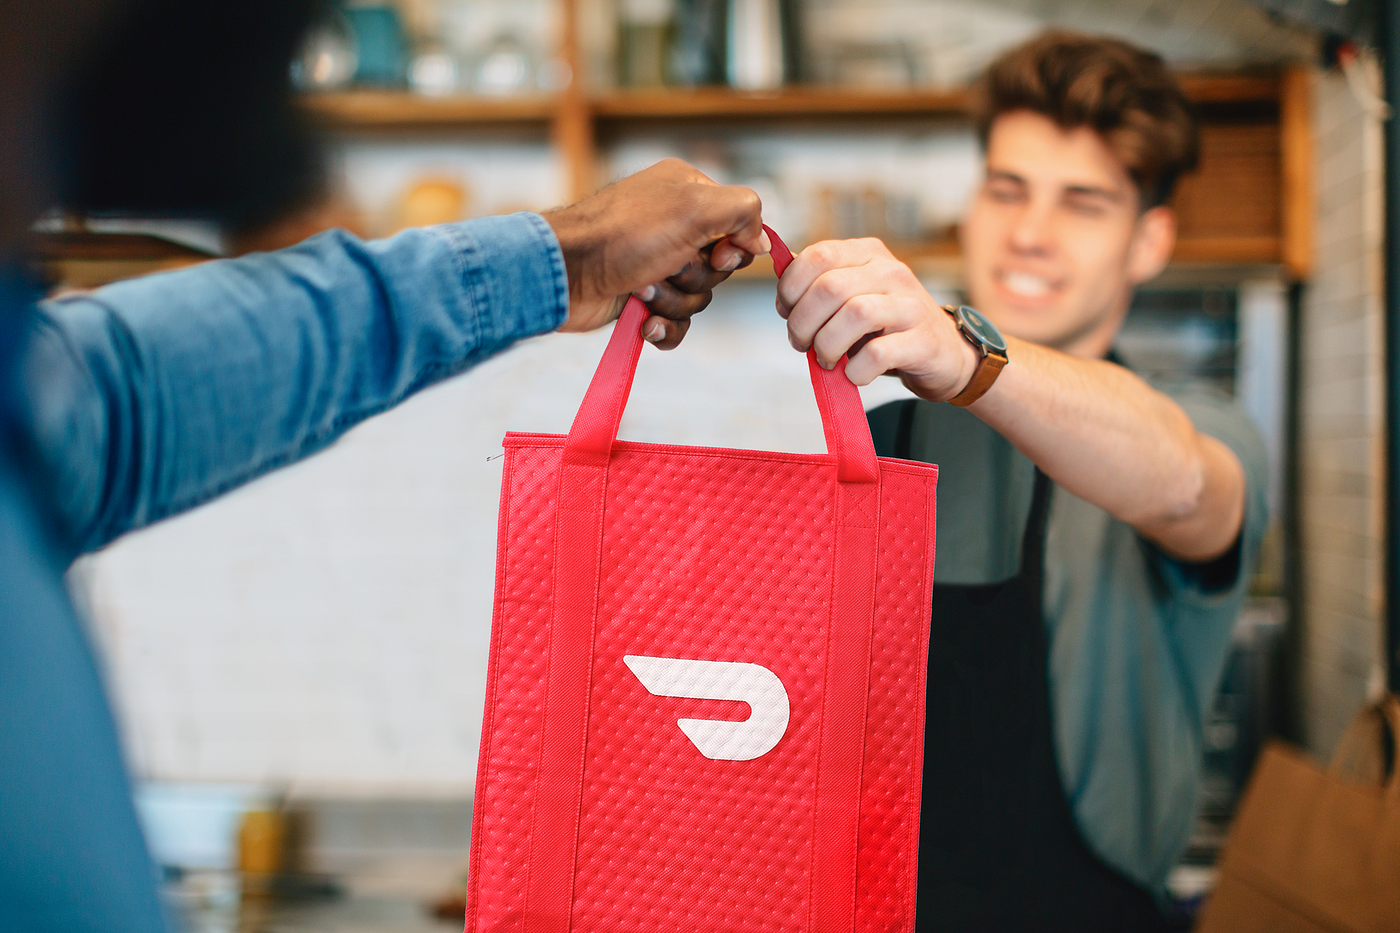 DoorDash enables global spending with built-in controls and improves  visibility